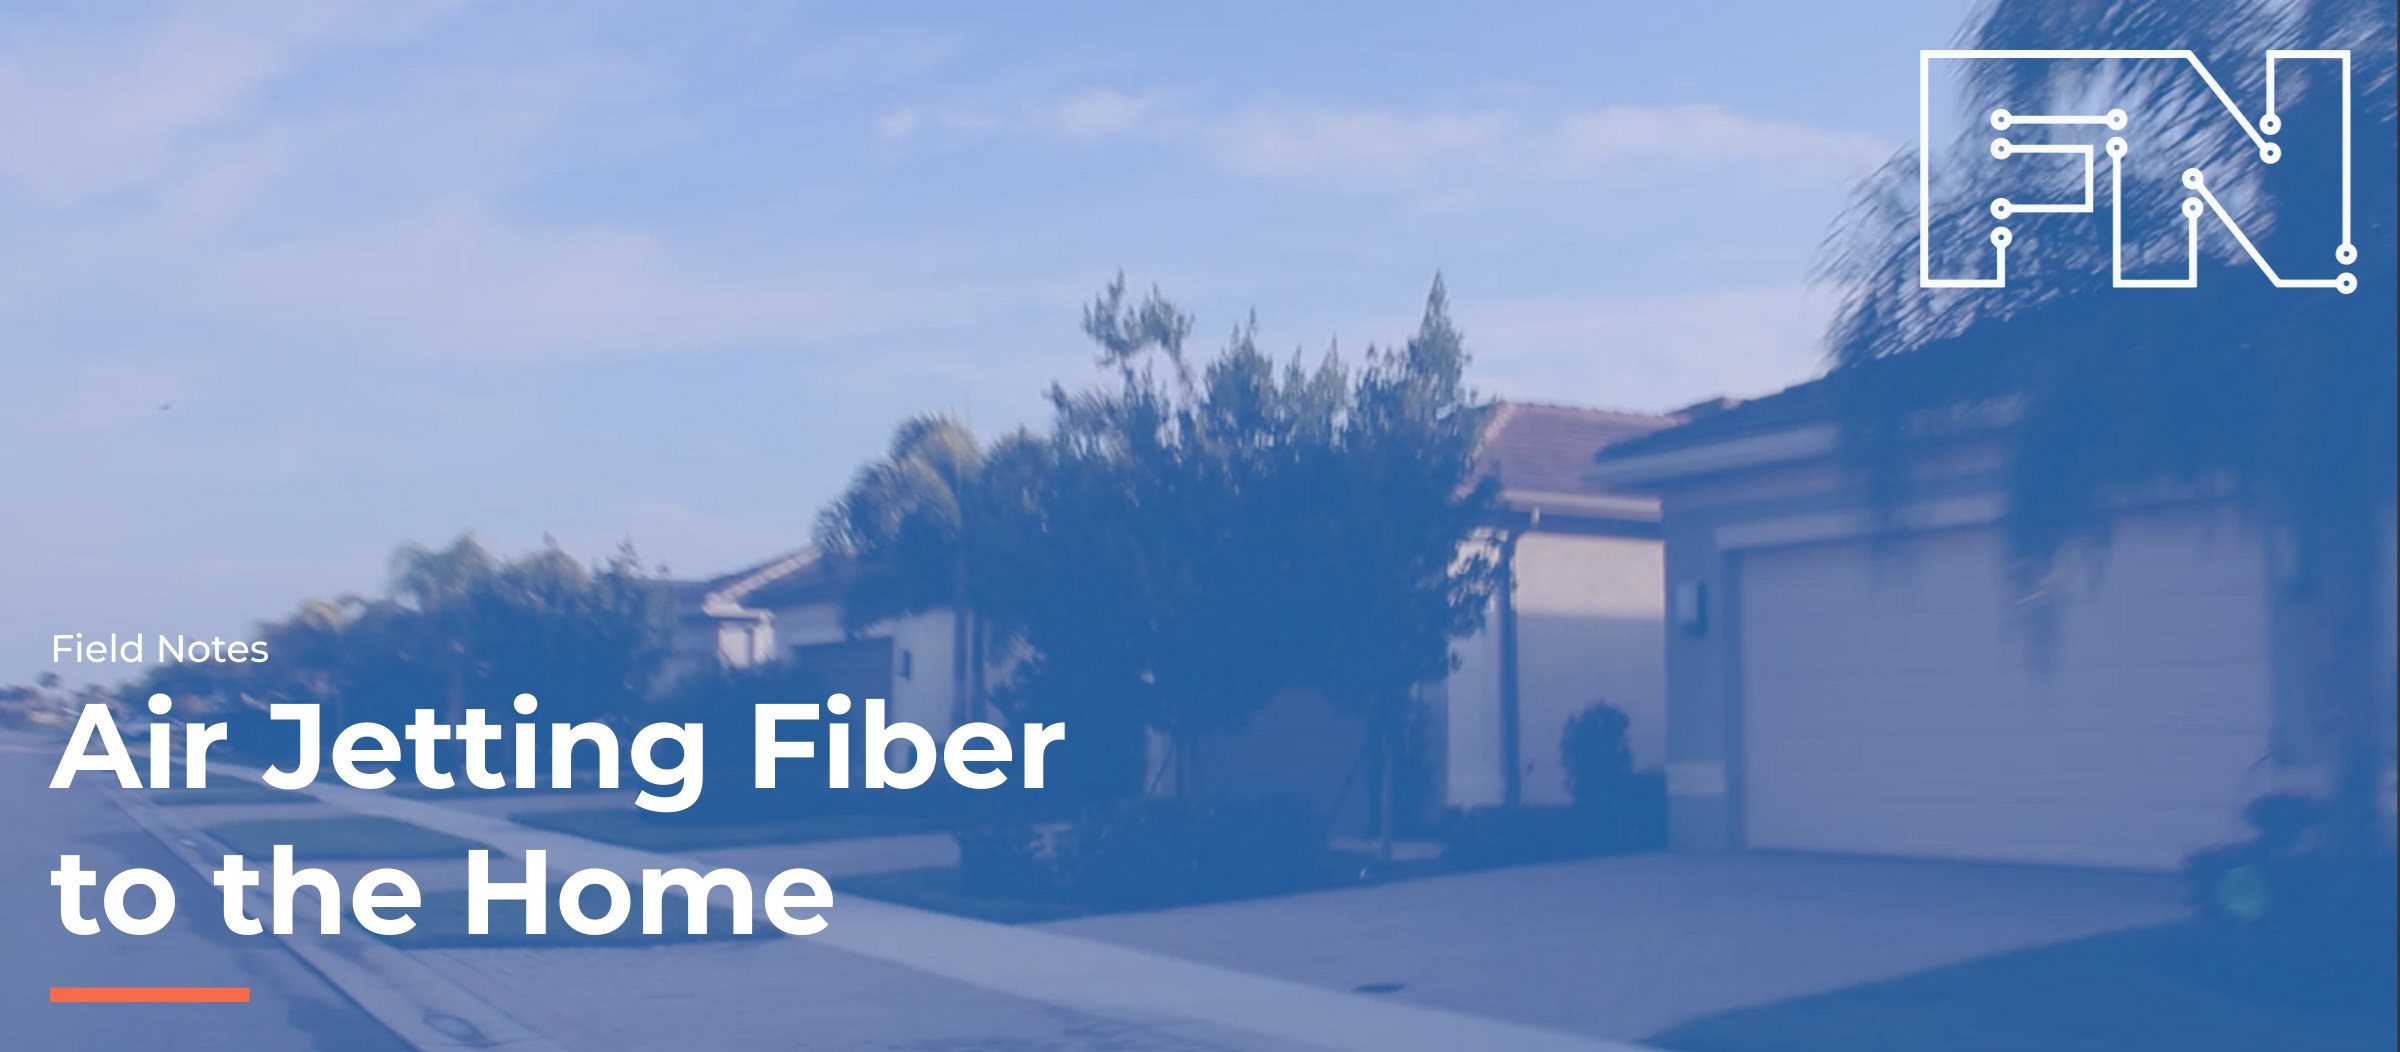 Field notes - air jetting- Fiber to the home